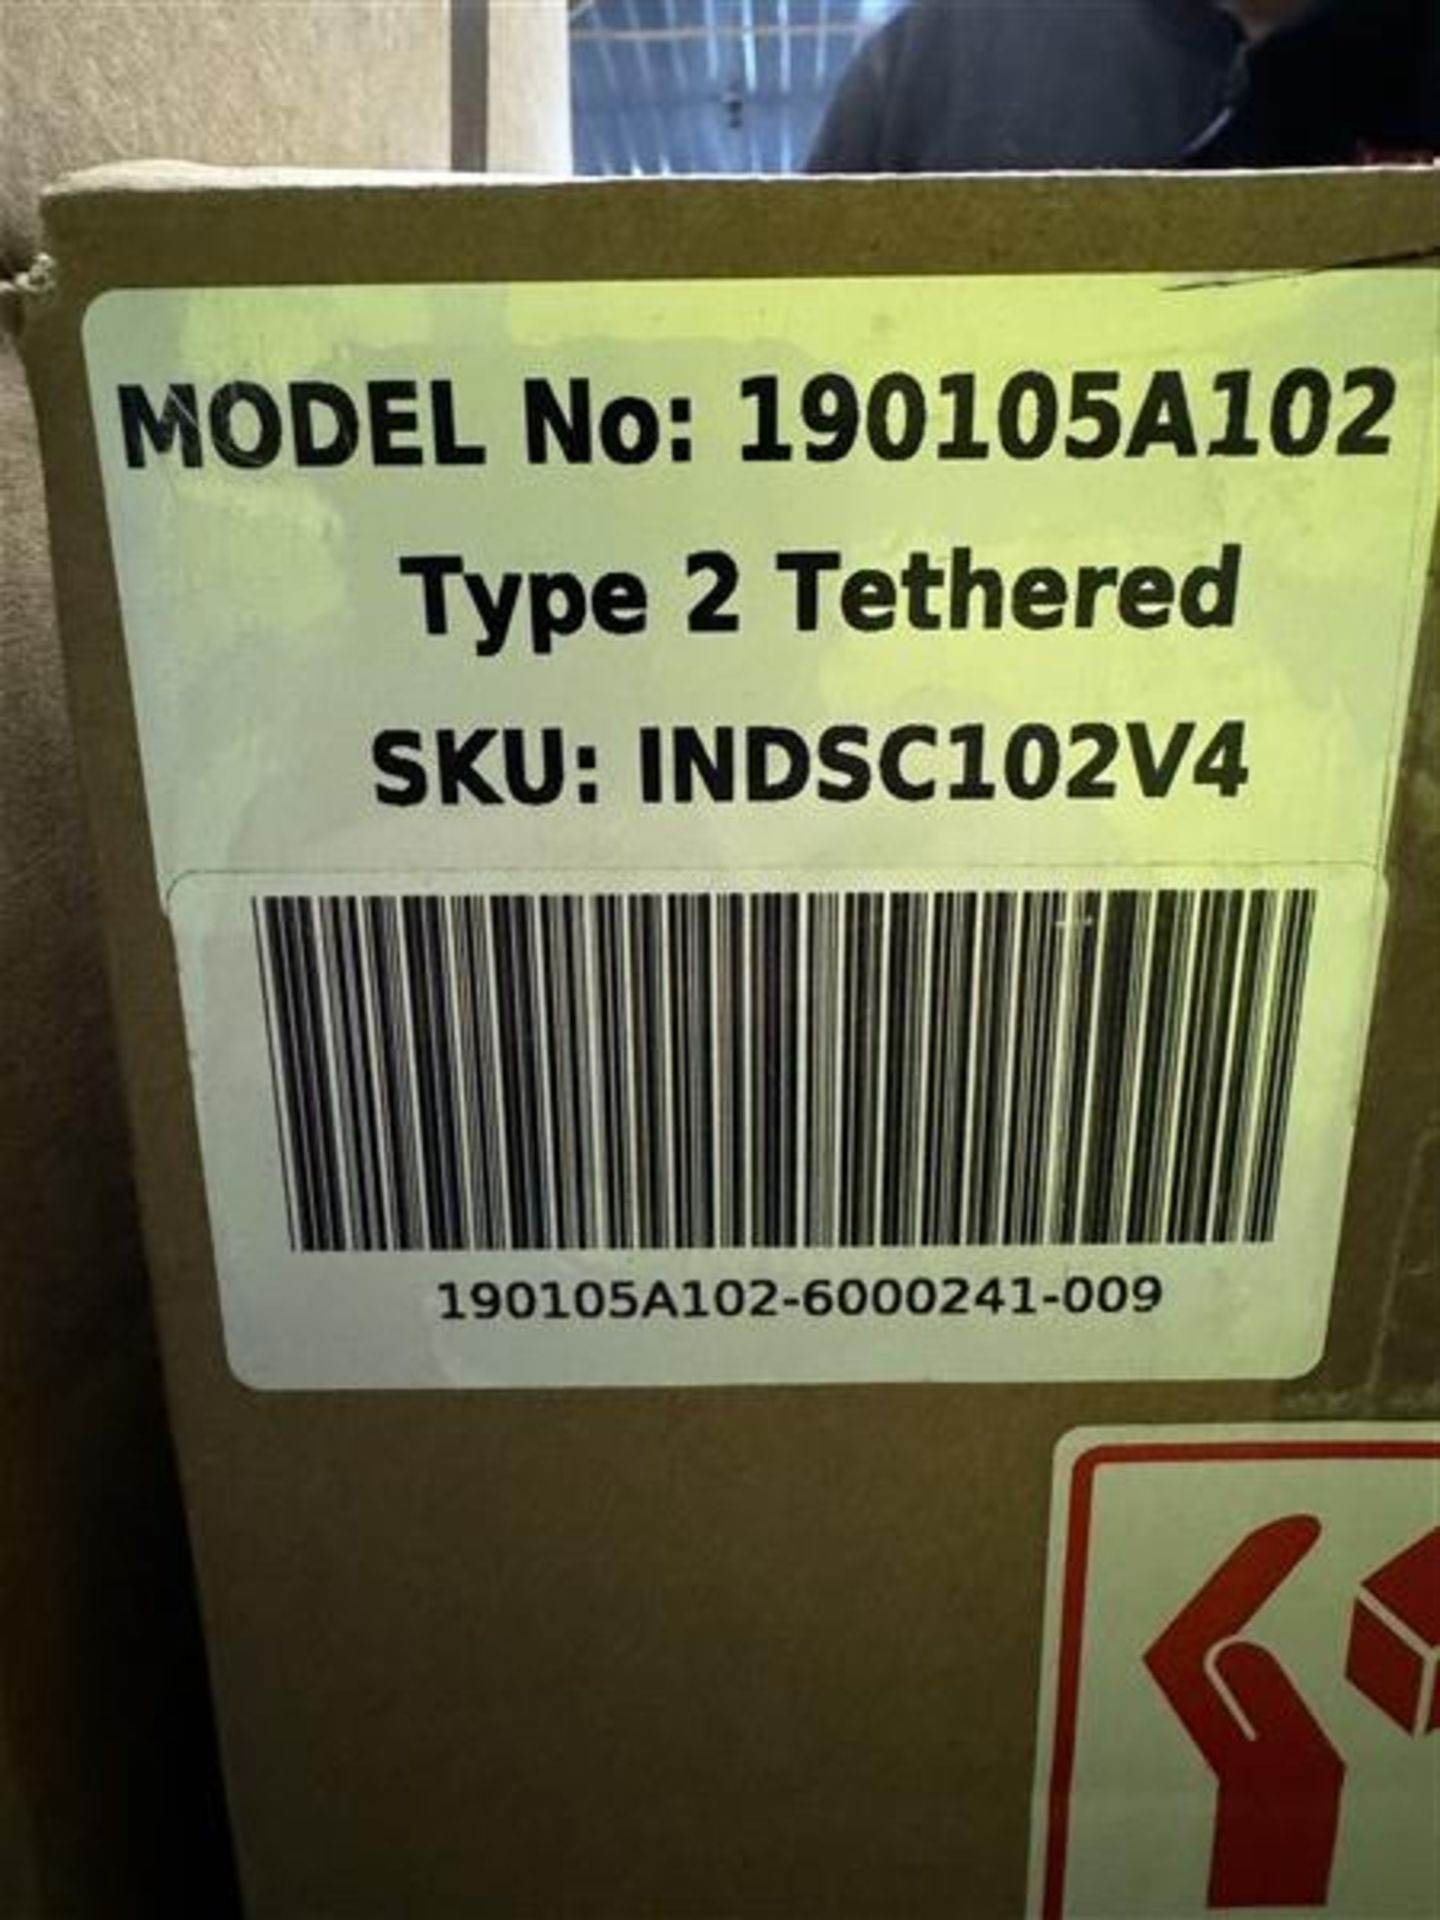 Project EV electric car charger, model 190105A102, type 2 thethered, SKU: INDSC102V4 - Image 2 of 3